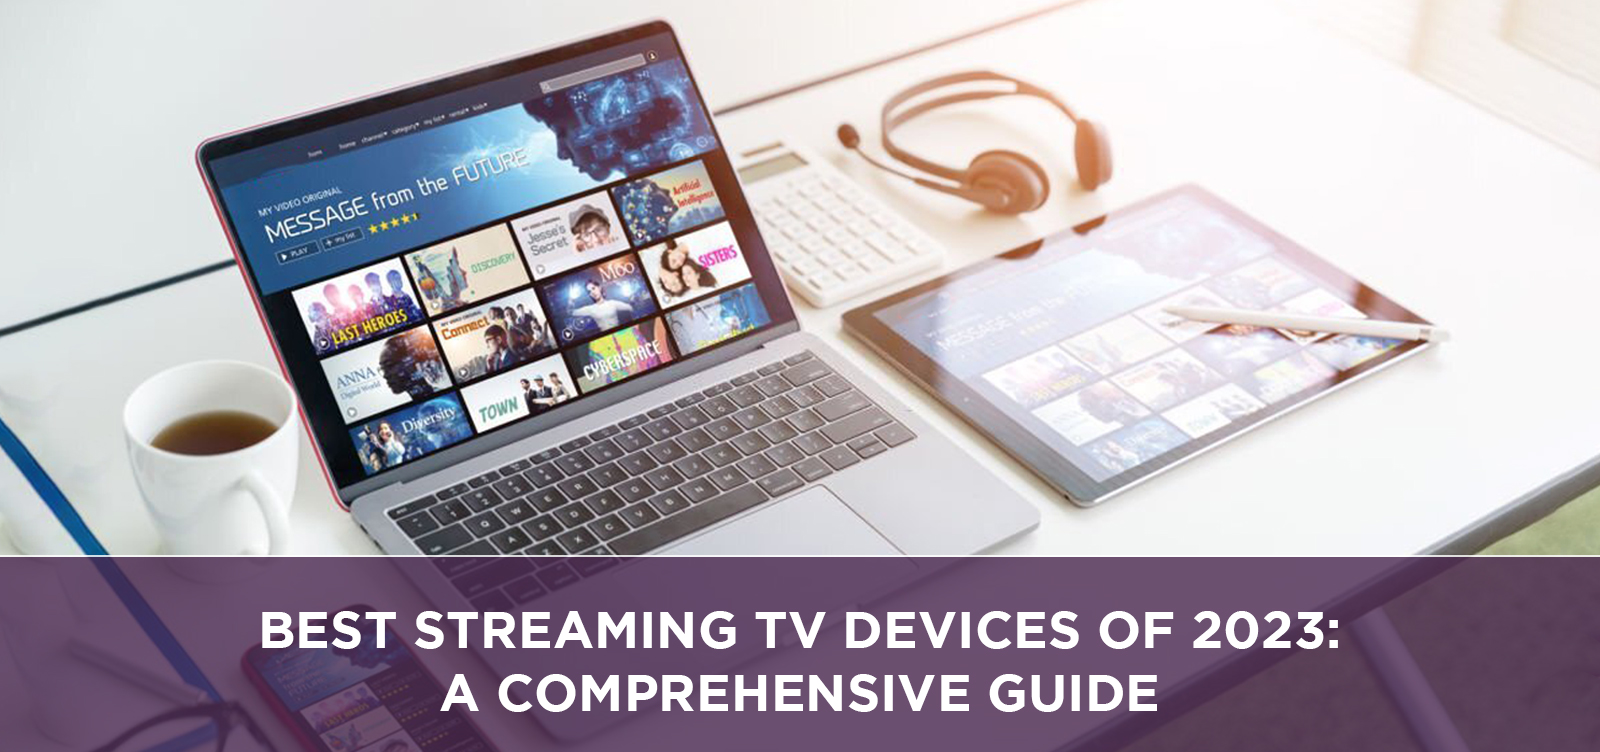 Best Streaming TV Devices of 2023: A Comprehensive Guide